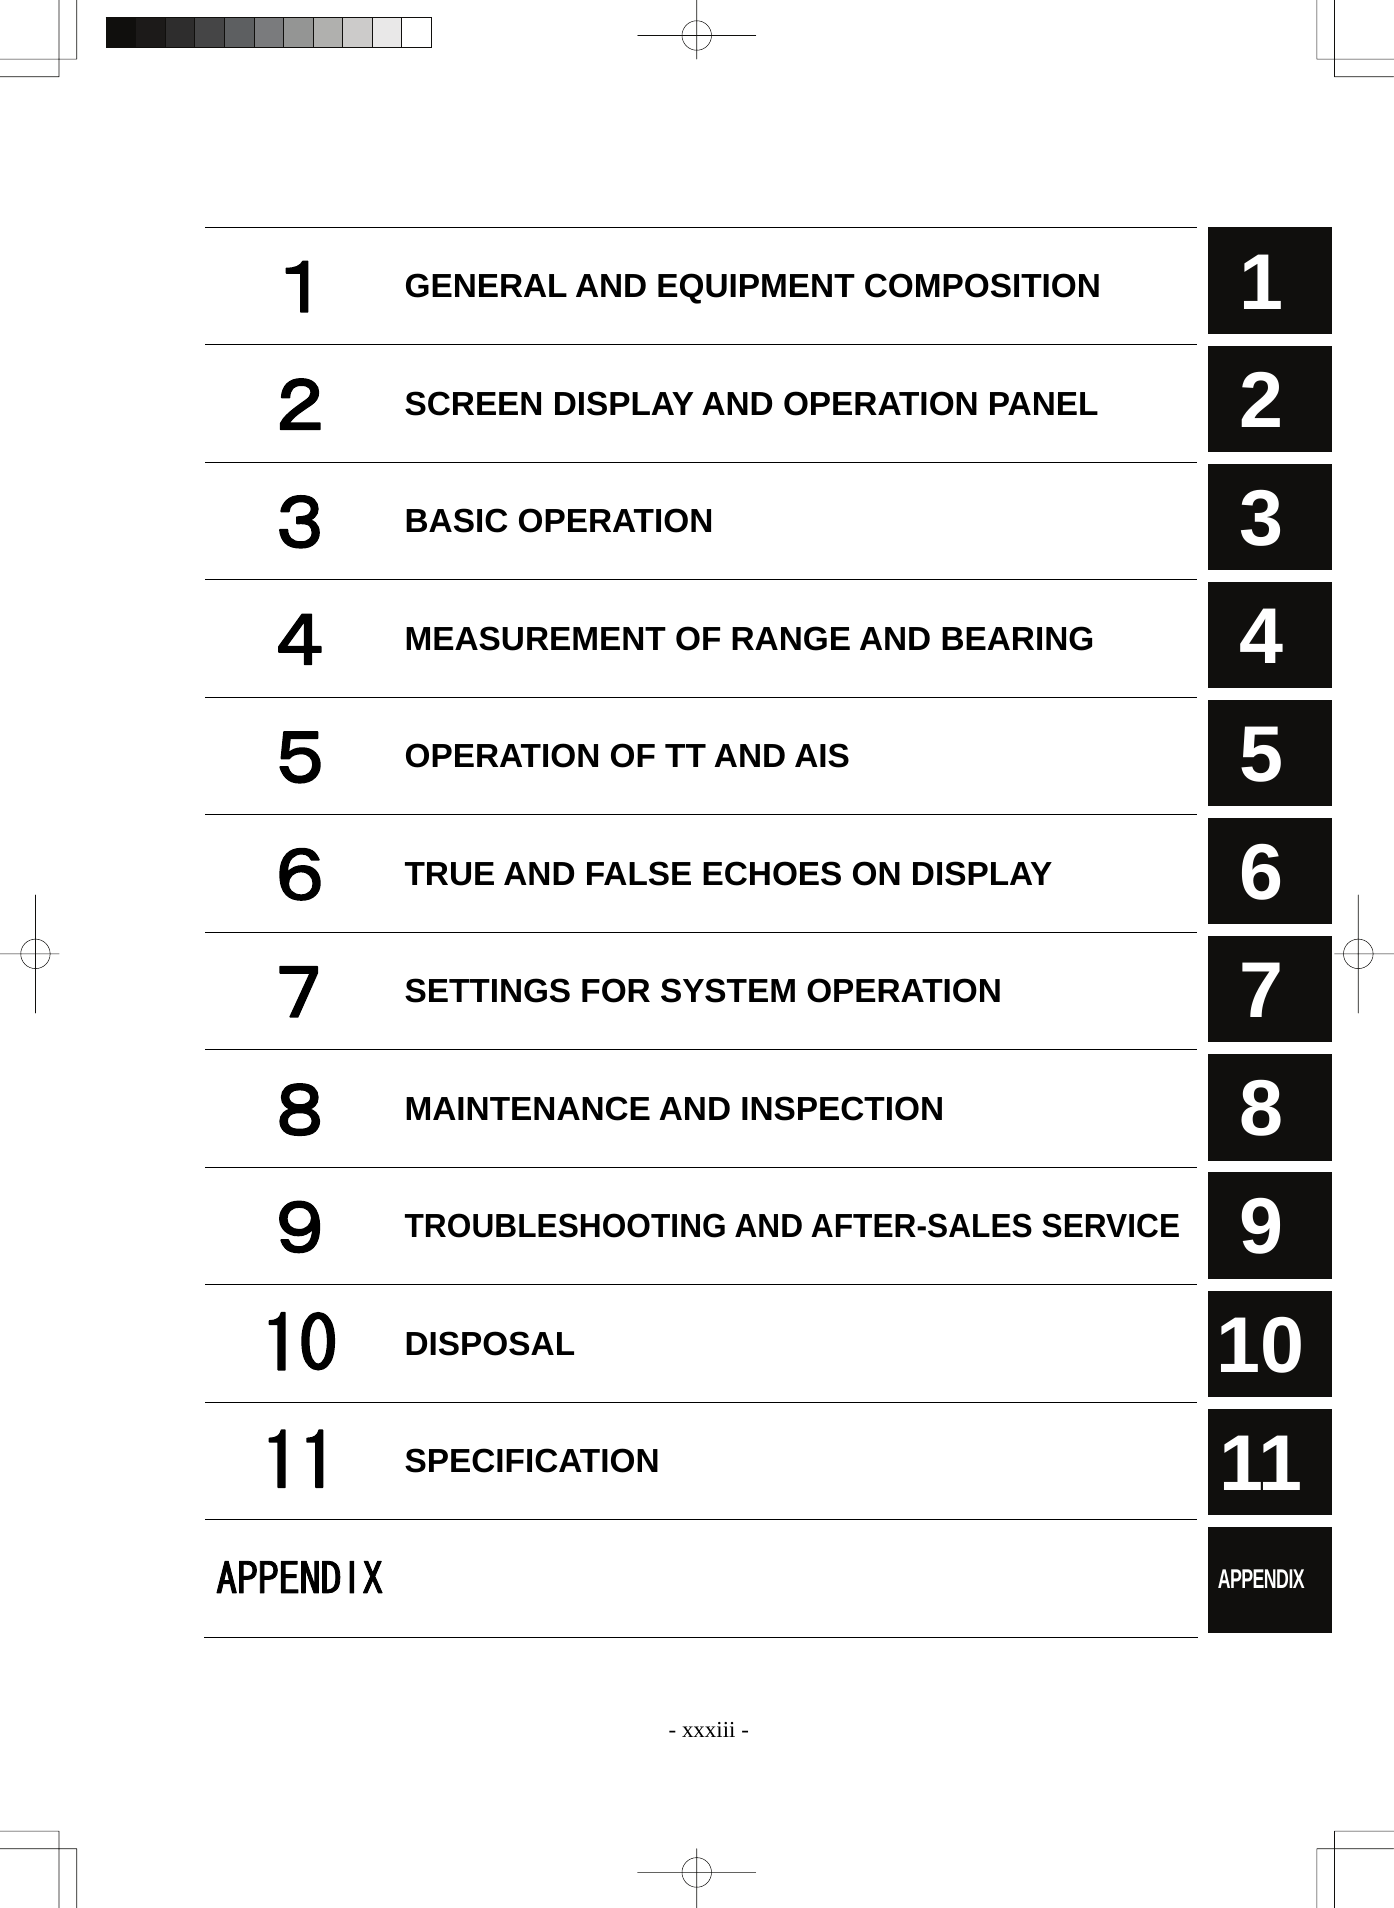   - xxxiii - 3 4 5 2 1 6 7 8 9 10 11 APPENDIX  １ GENERAL AND EQUIPMENT COMPOSITION ２ SCREEN DISPLAY AND OPERATION PANEL ３ BASIC OPERATION ４ MEASUREMENT OF RANGE AND BEARING   ５ OPERATION OF TT AND AIS ６ TRUE AND FALSE ECHOES ON DISPLAY   ７ SETTINGS FOR SYSTEM OPERATION ８ MAINTENANCE AND INSPECTION ９ TROUBLESHOOTING AND AFTER-SALES SERVICE10  DISPOSAL 11  SPECIFICATION APPENDIX   